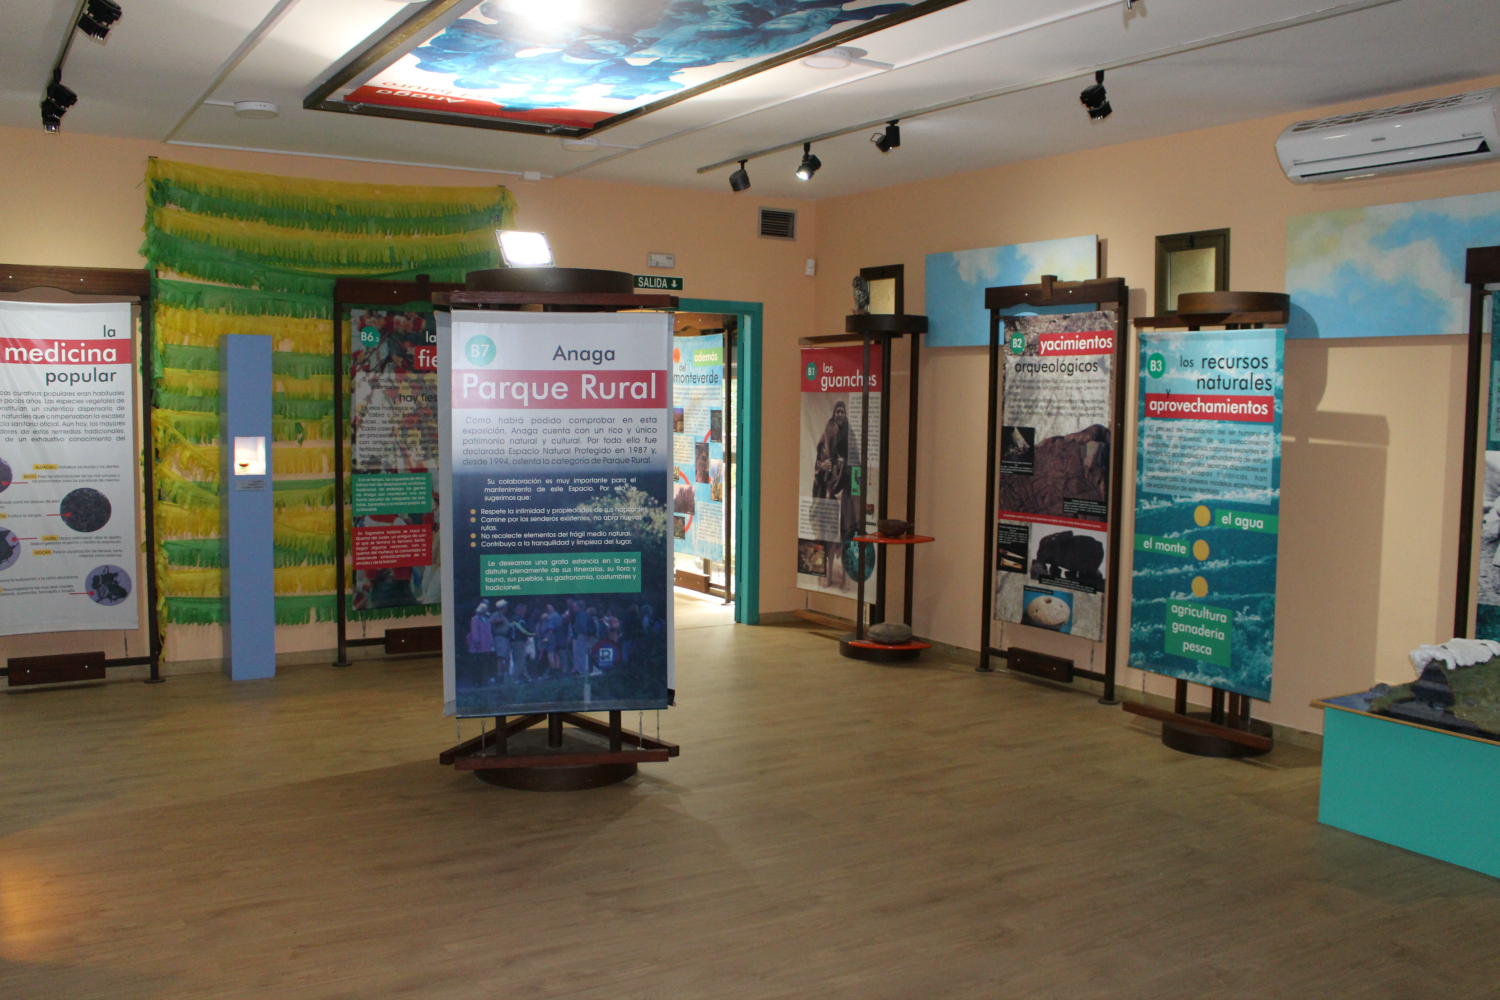 Visitor's center in Anaga, where you can collect information about the park and for your excursion